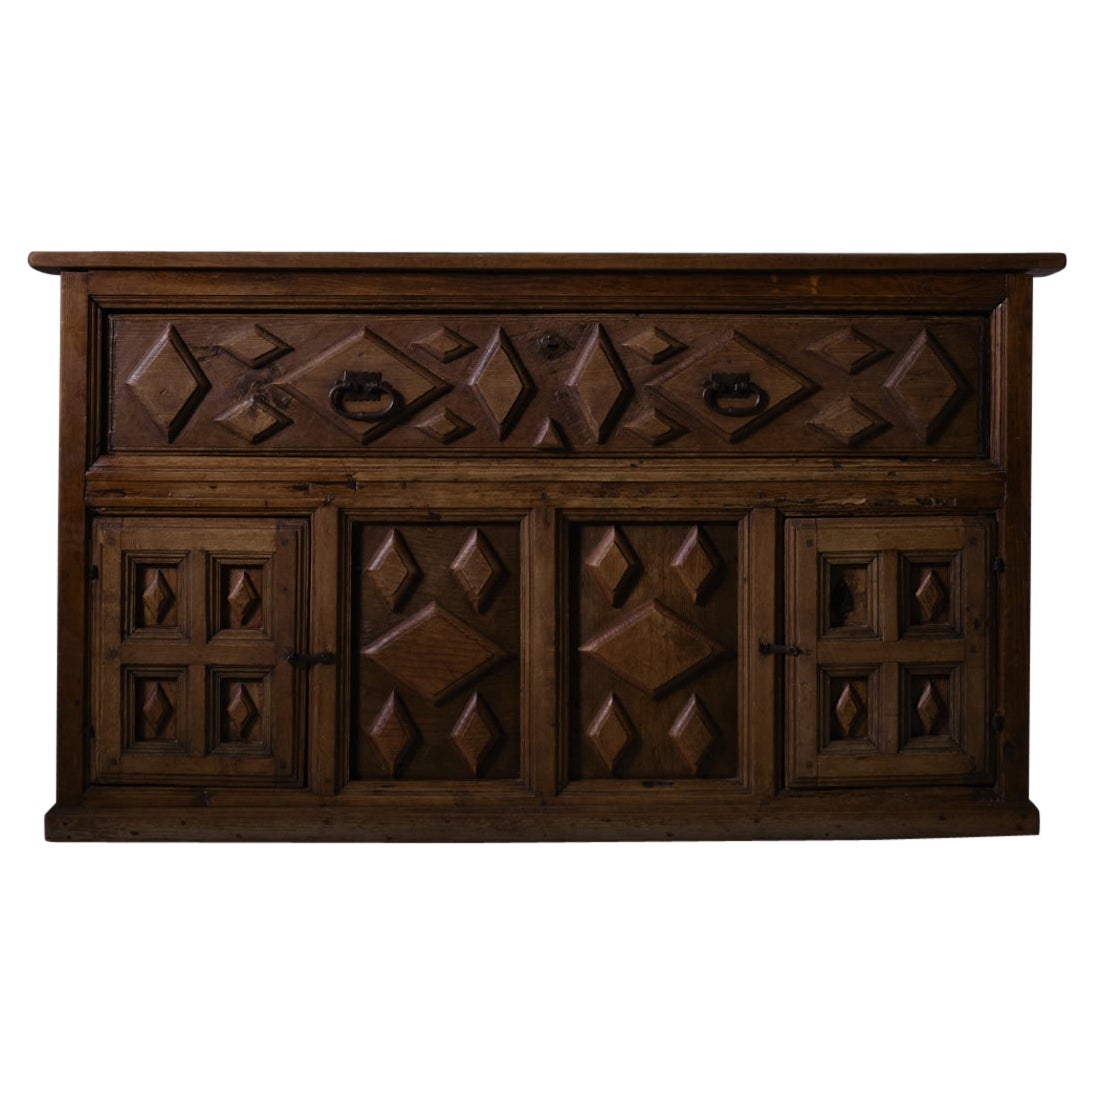 Spanish Colonial Cabinet, Early 19th Century